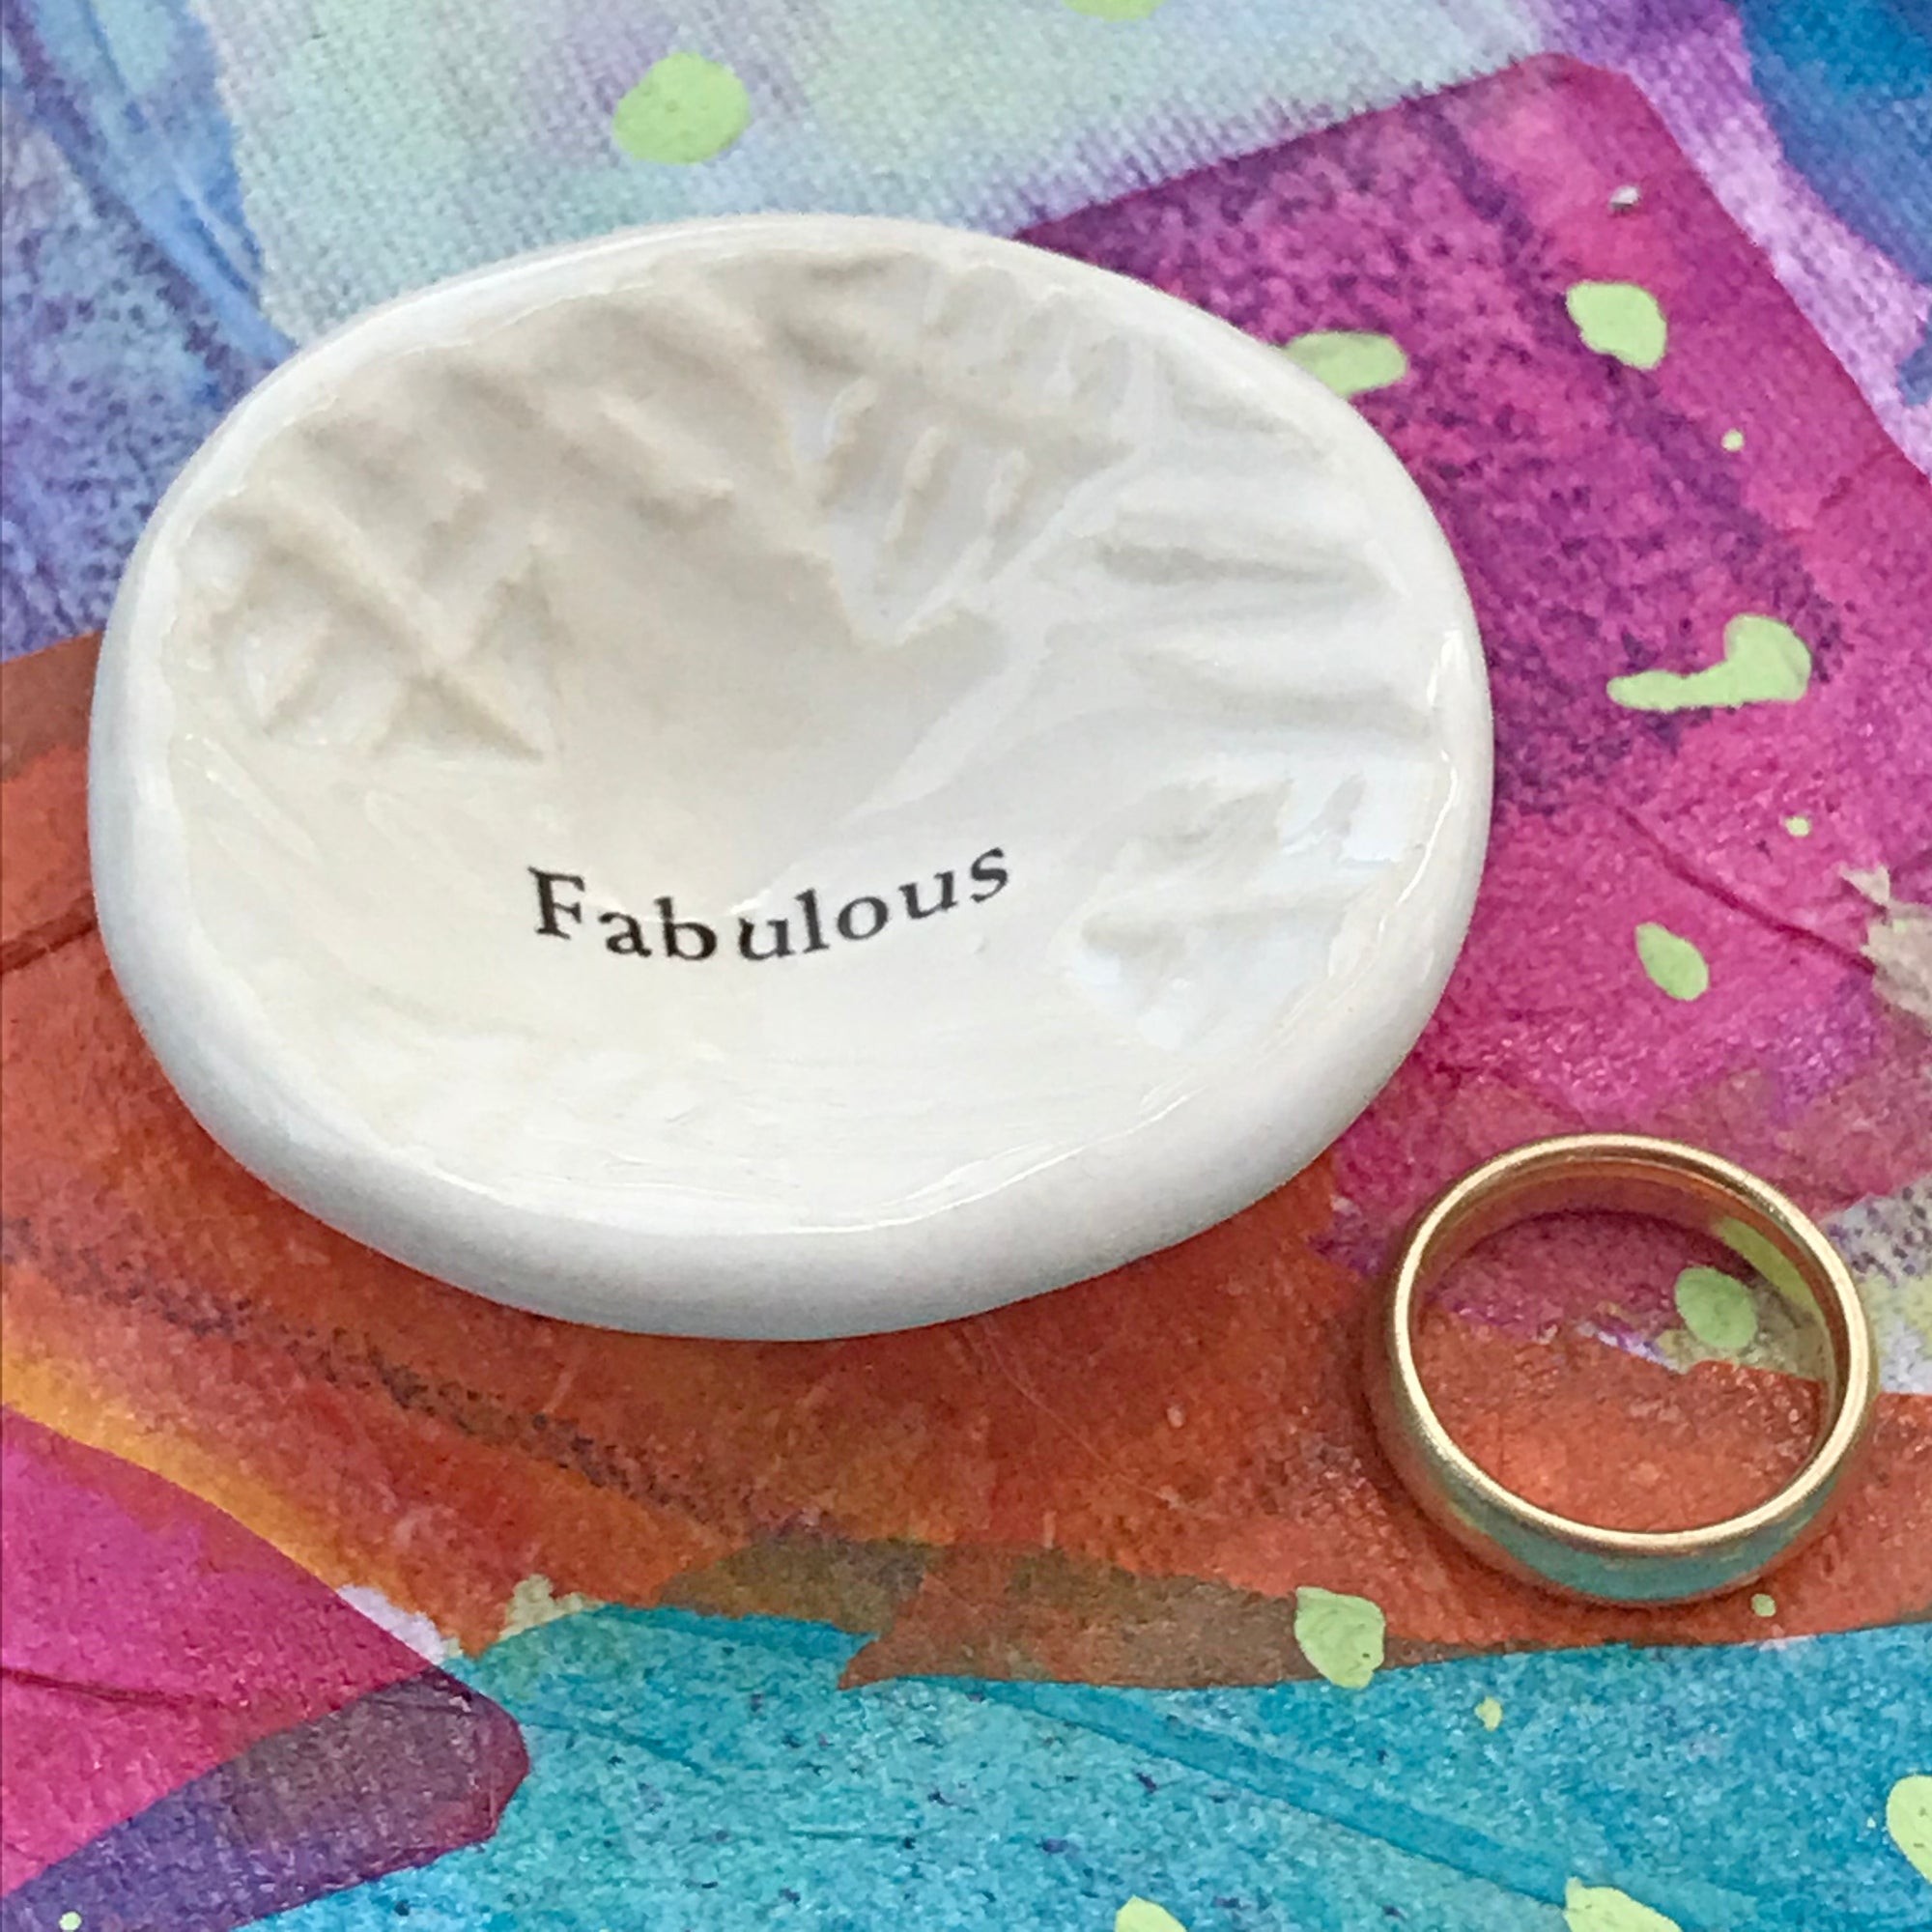 A "Fabulous" Giving Bowl is a perfect gift when you want to show praise and admiration.  